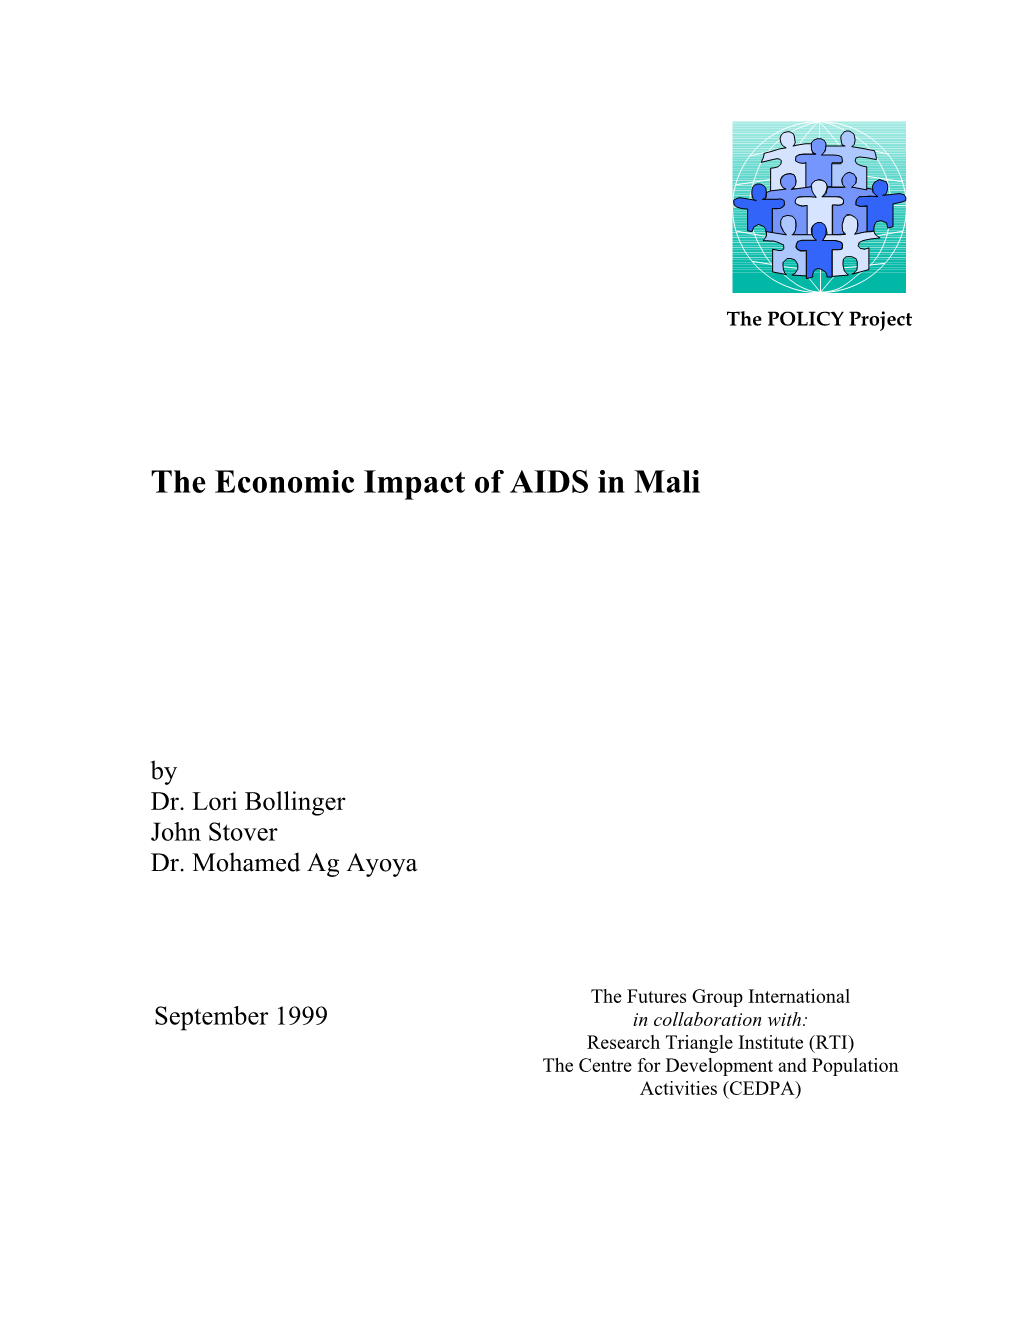 The Economic Impact of AIDS in Mali